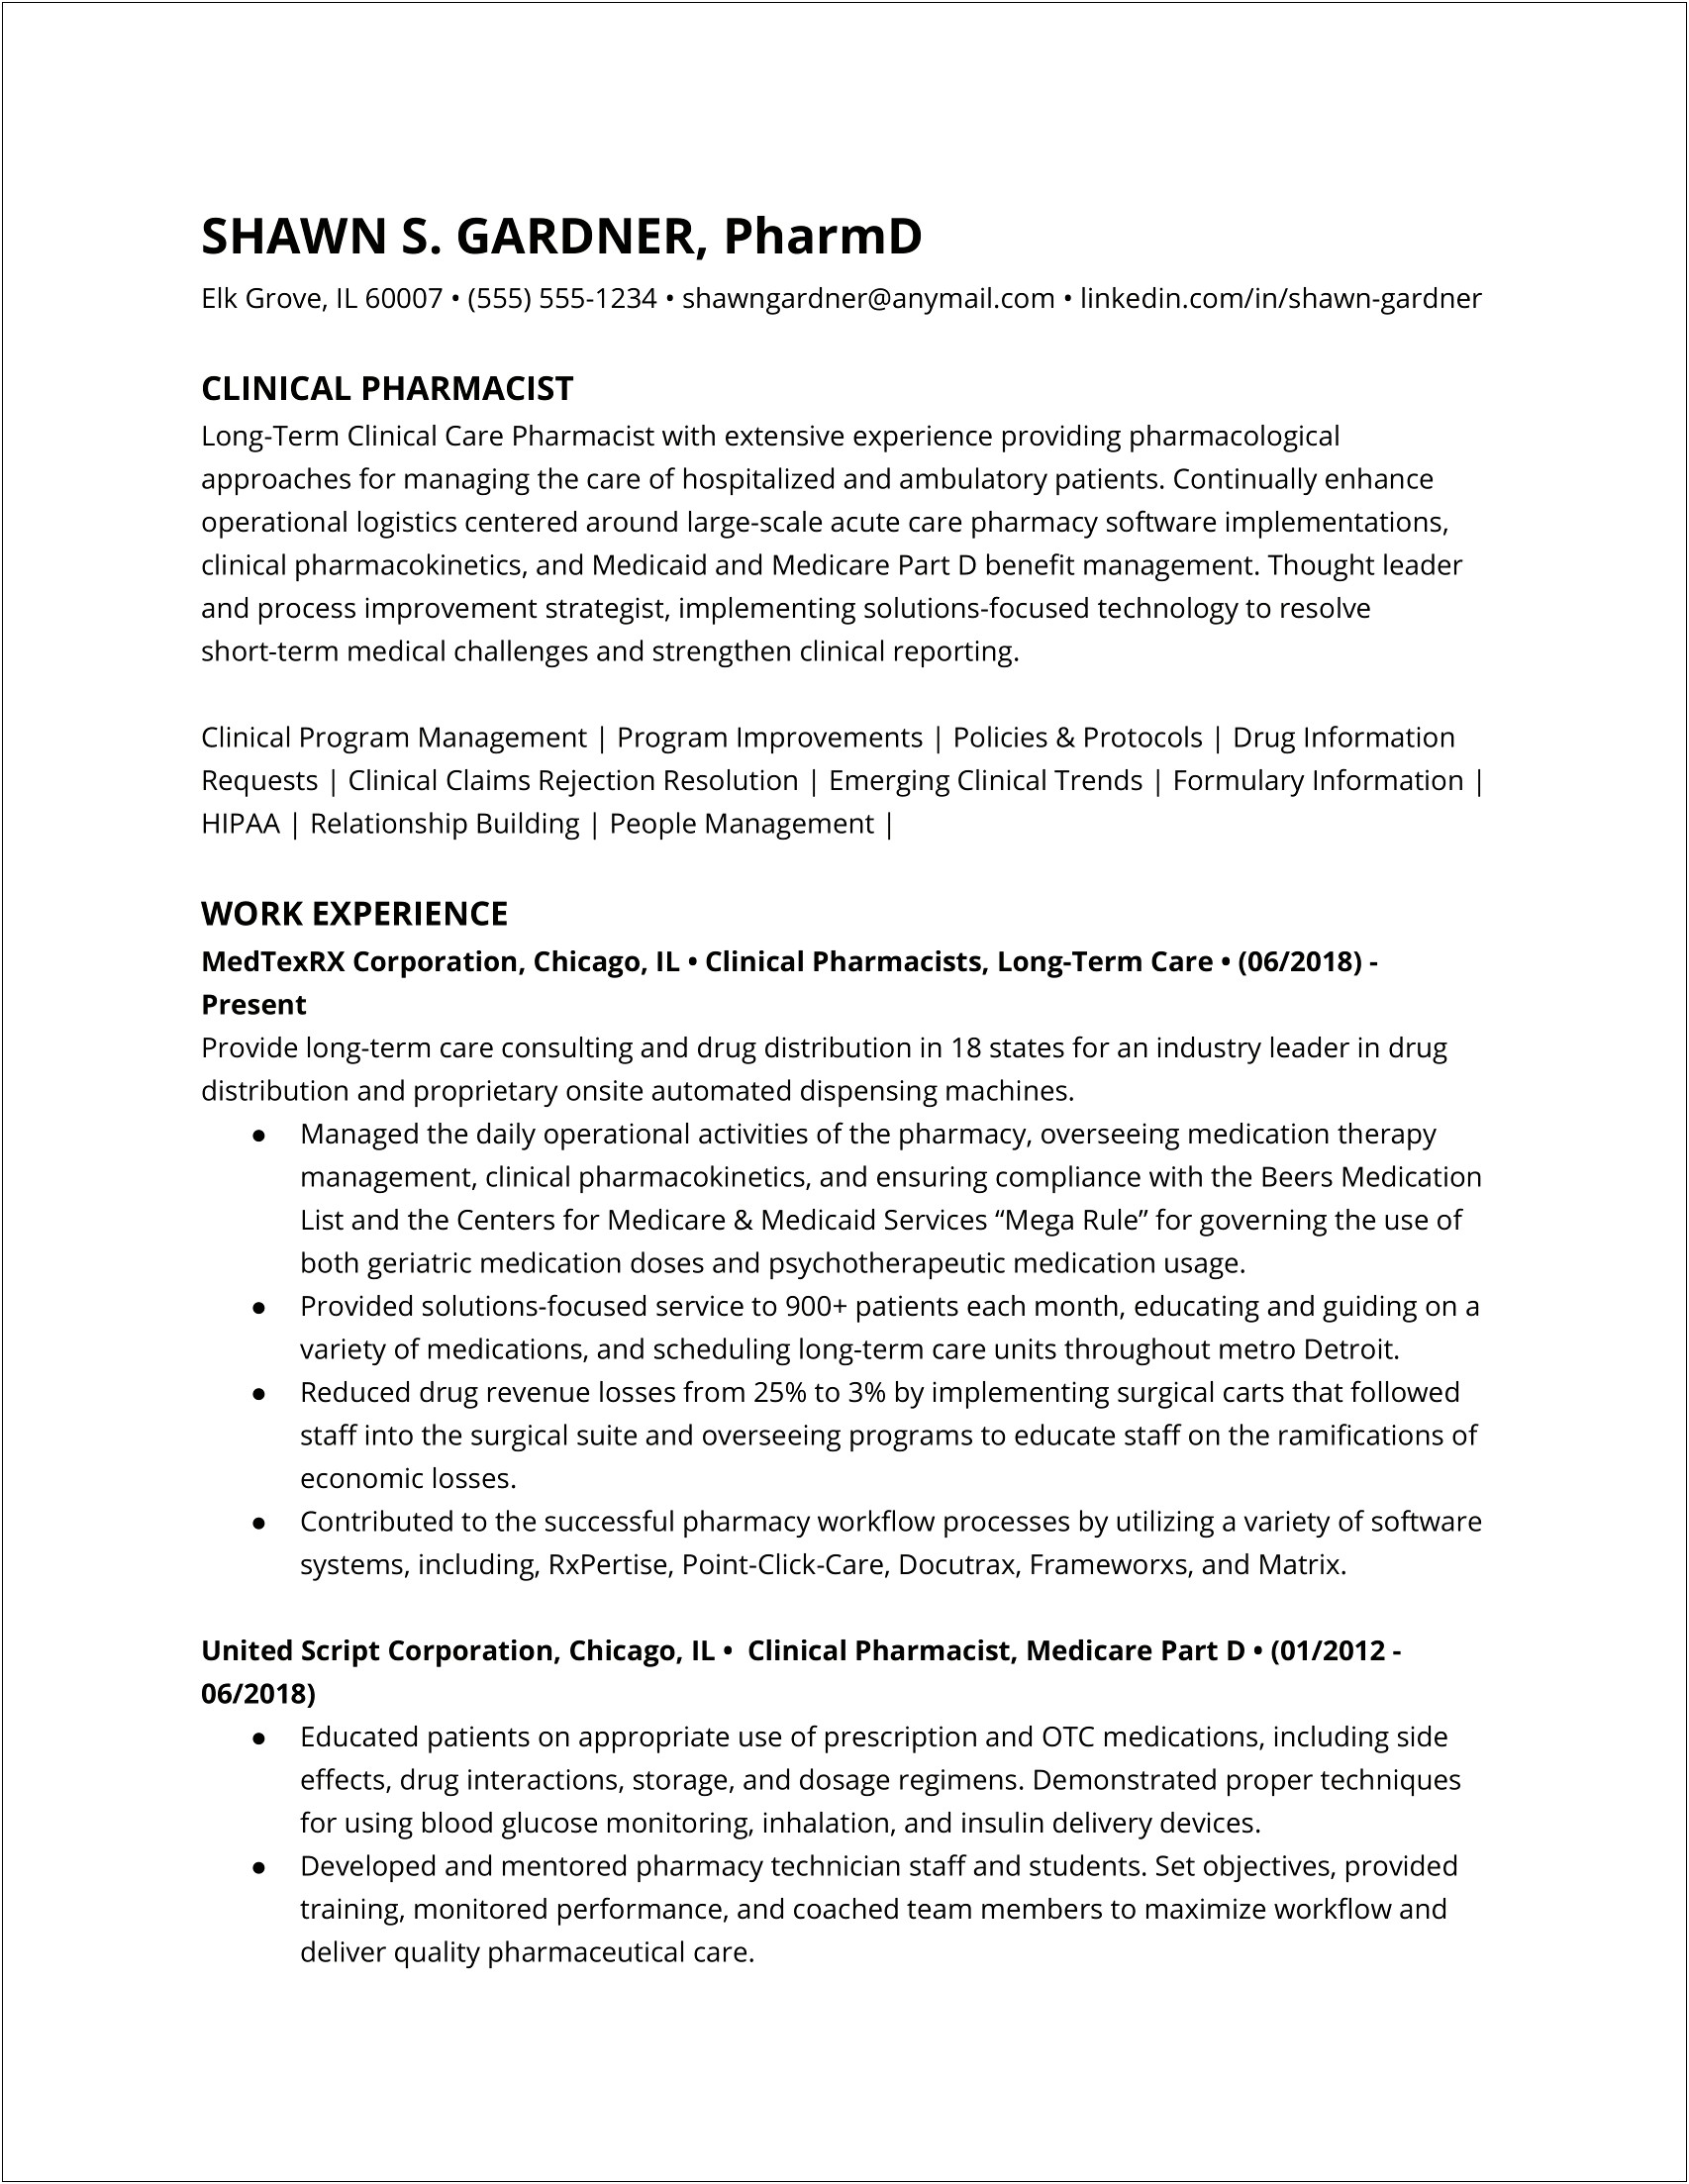 Pharmaceutical Industry Quality Assurance Professional Experience For Resume